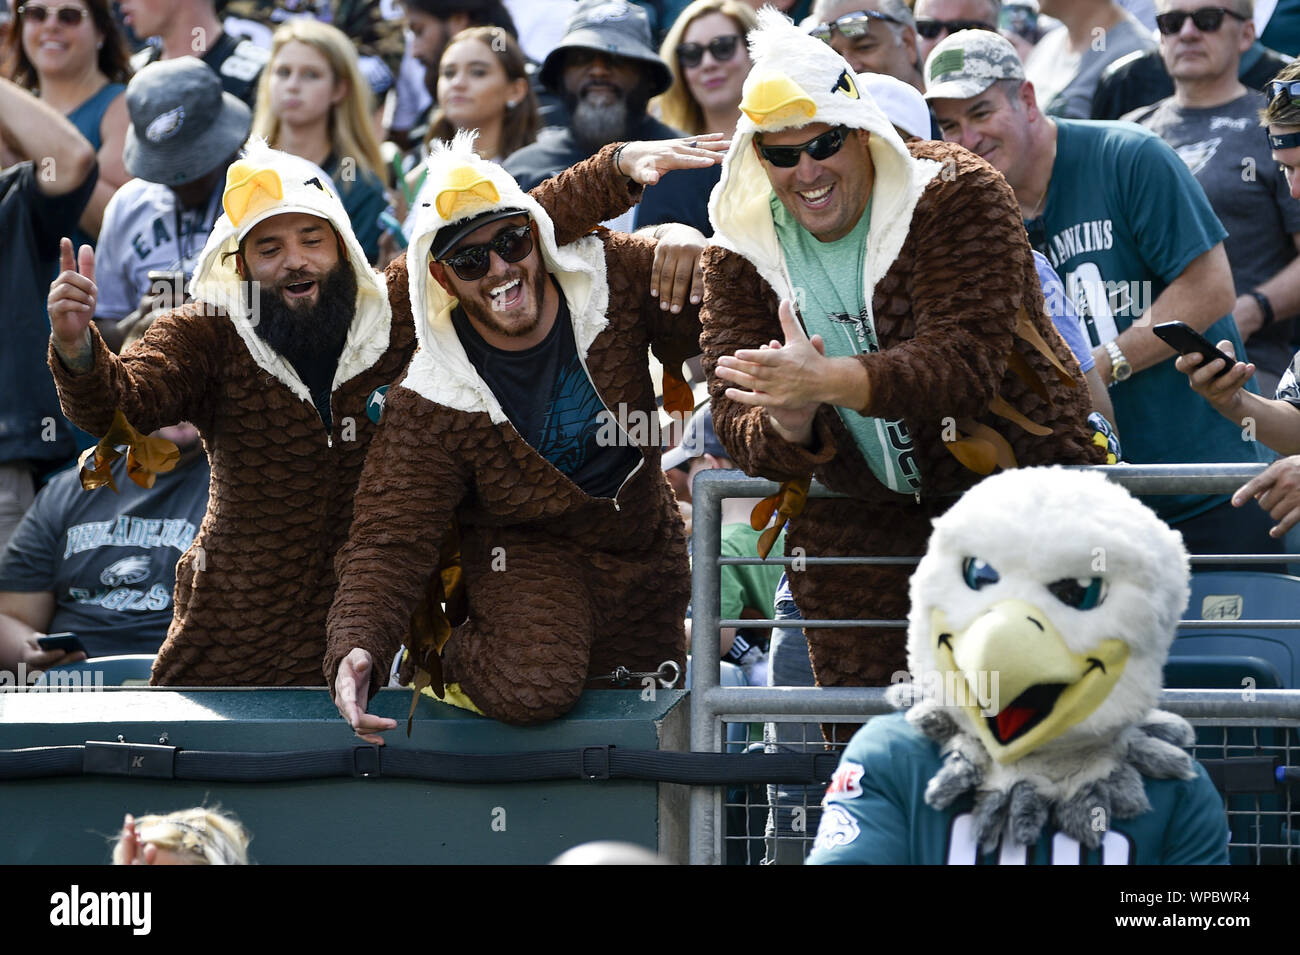 Philadelphia, United States. 08th Sep, 2019. Philadelphia Eagles fans take a photo with Eagles mascot Swoop during the second half against the Washington Redskins at Lincoln Financial Field in Philadelphia on Sept. 8, 2019. The Eagles won 32-27. Photo by Derik Hamilton/UPI Credit: UPI/Alamy Live News Stock Photo